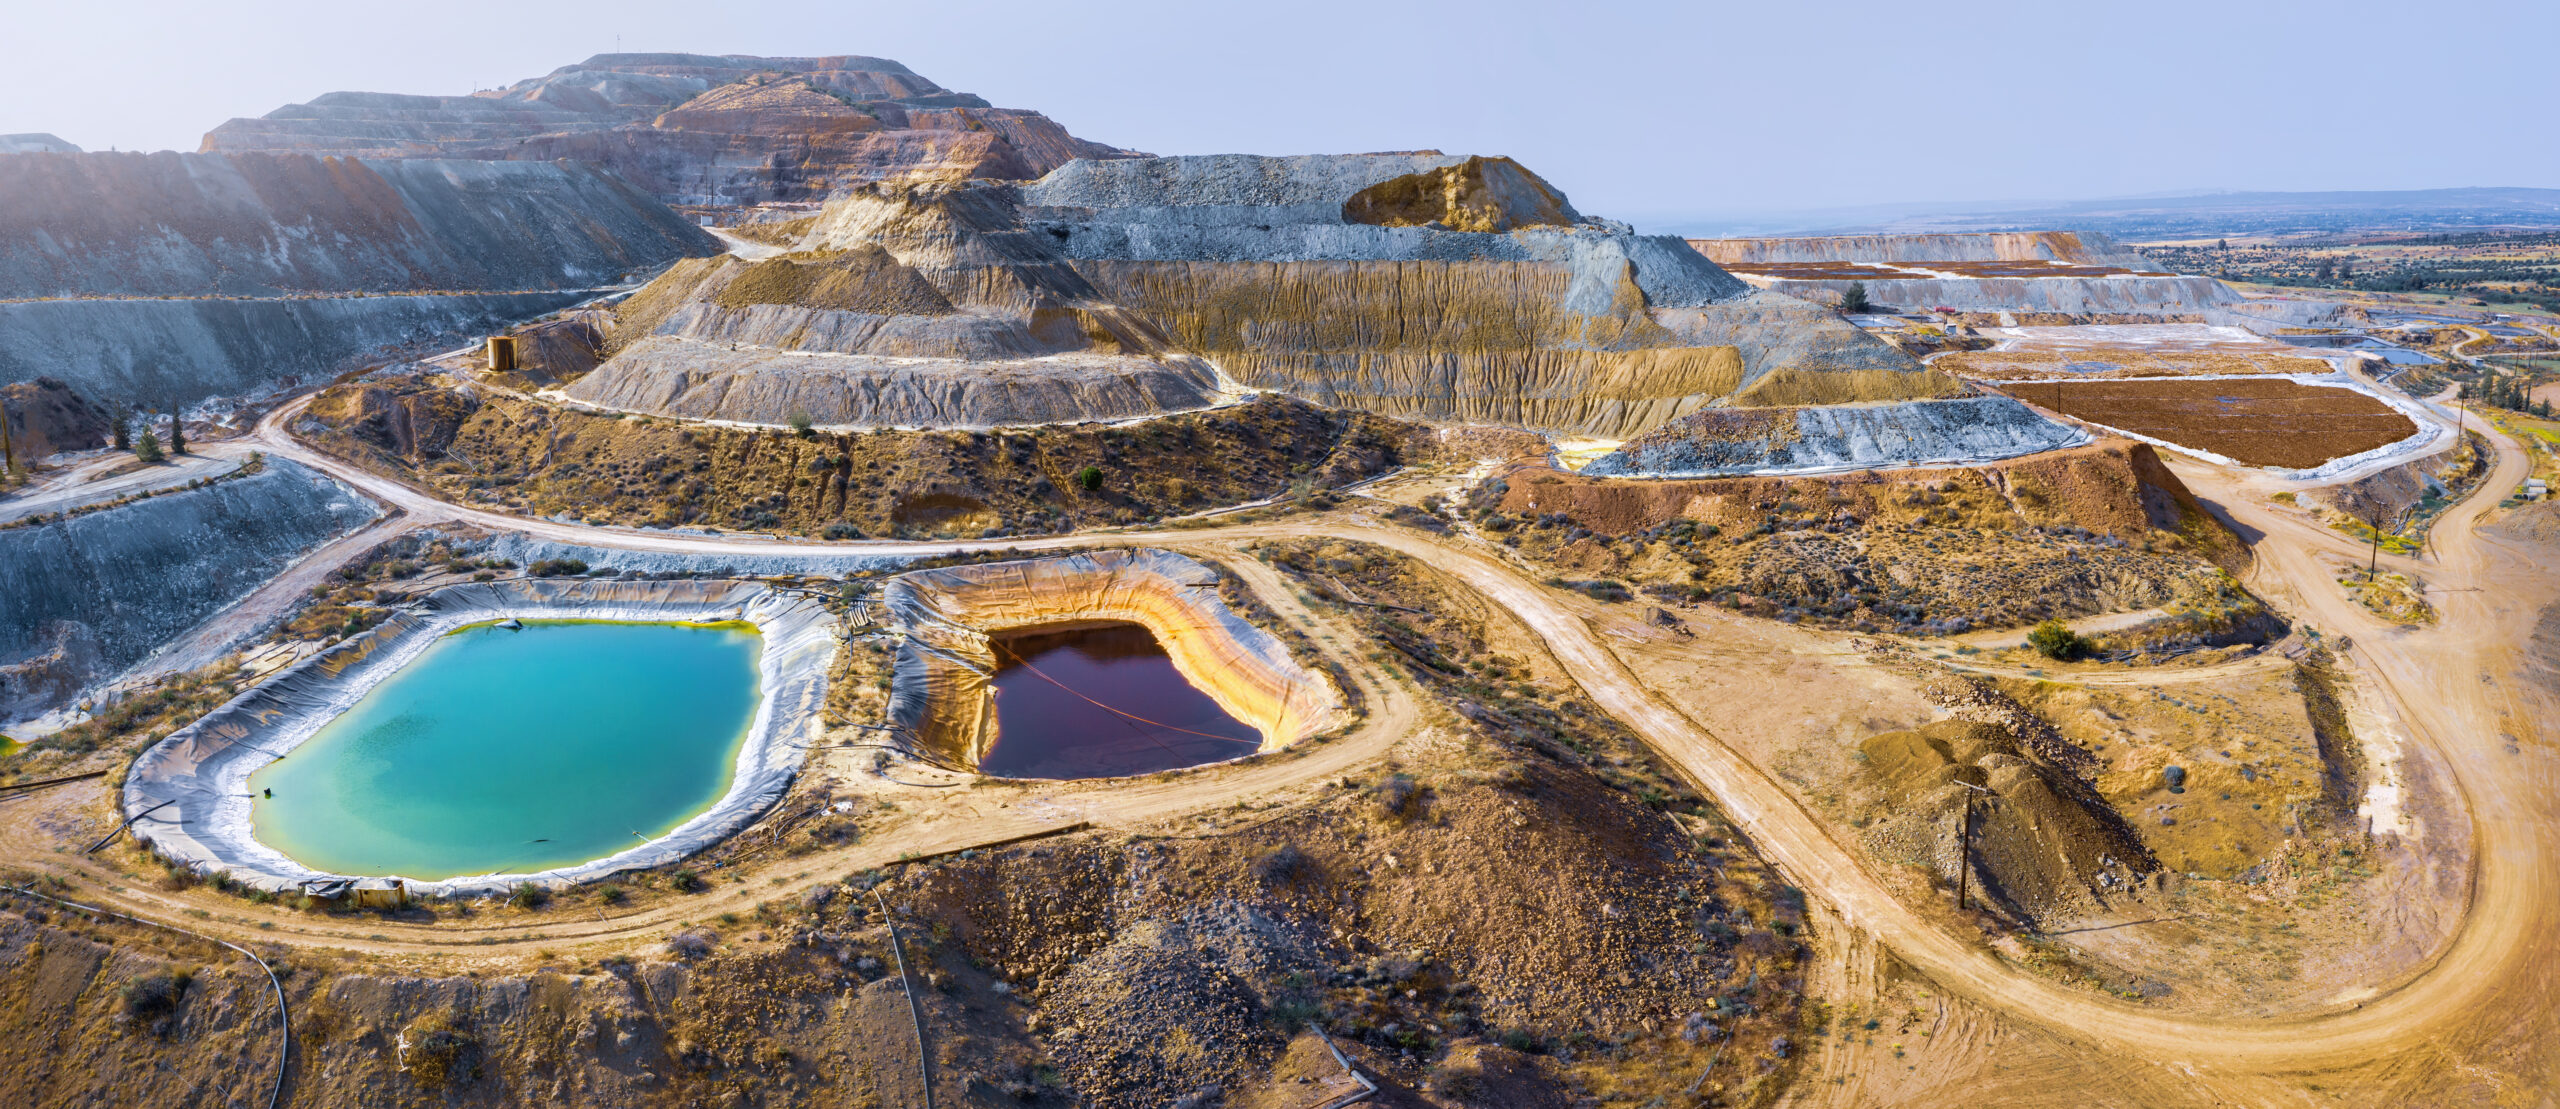 Copper mining with lake in mine pit and spoil heaps covered with pine trees.